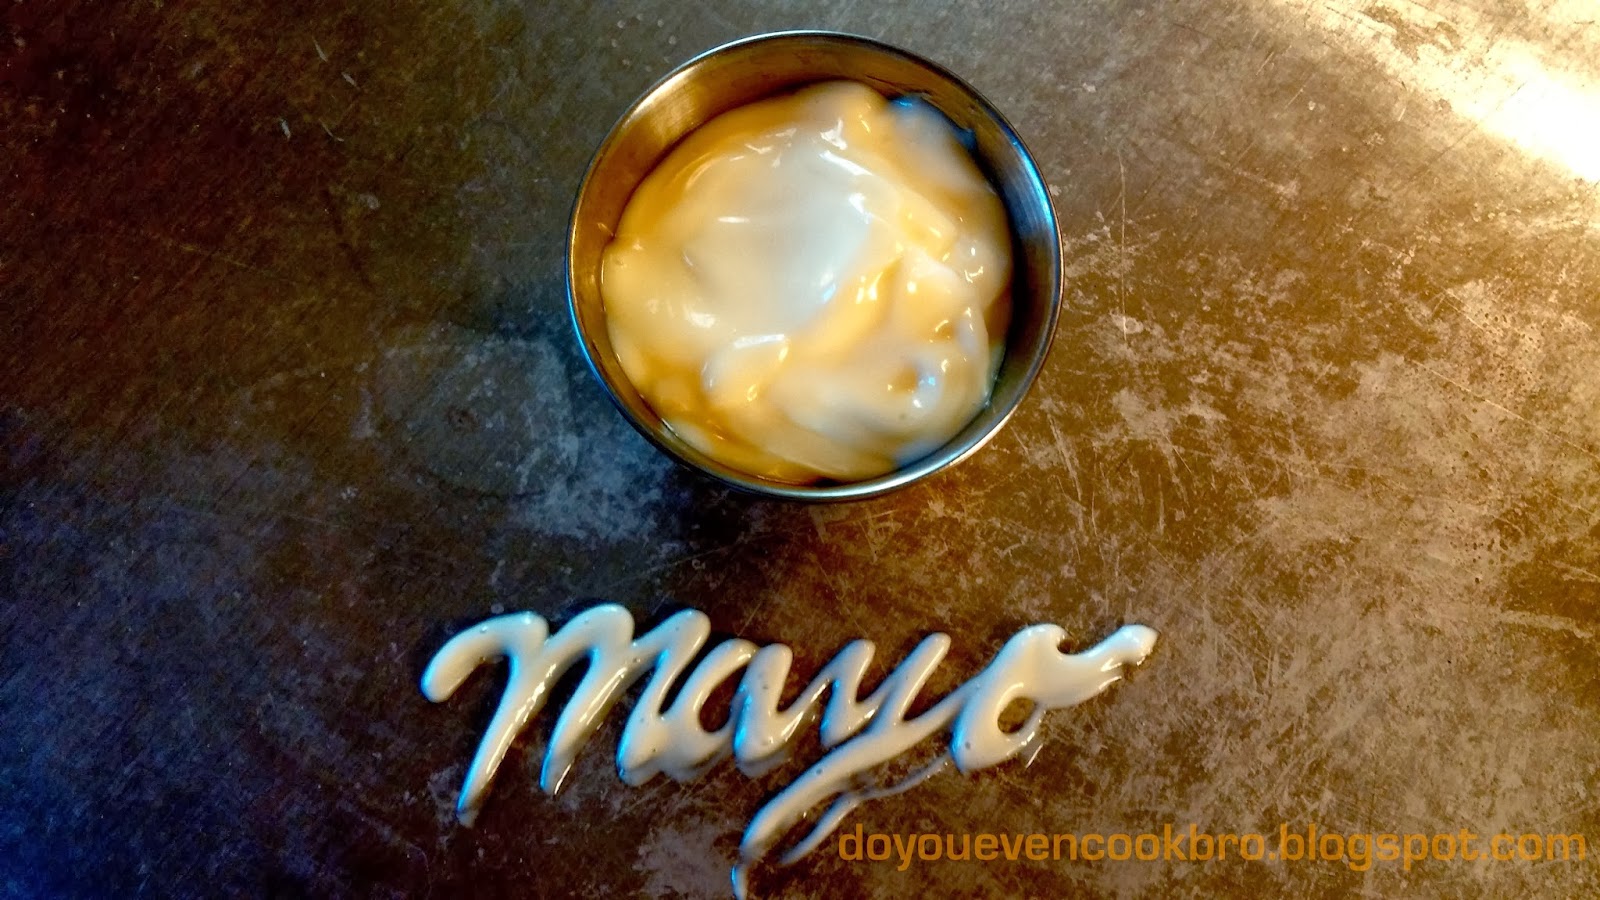 Do You Even Cook, Bro?: Mayo from Scratch - Oh, the Possibilities